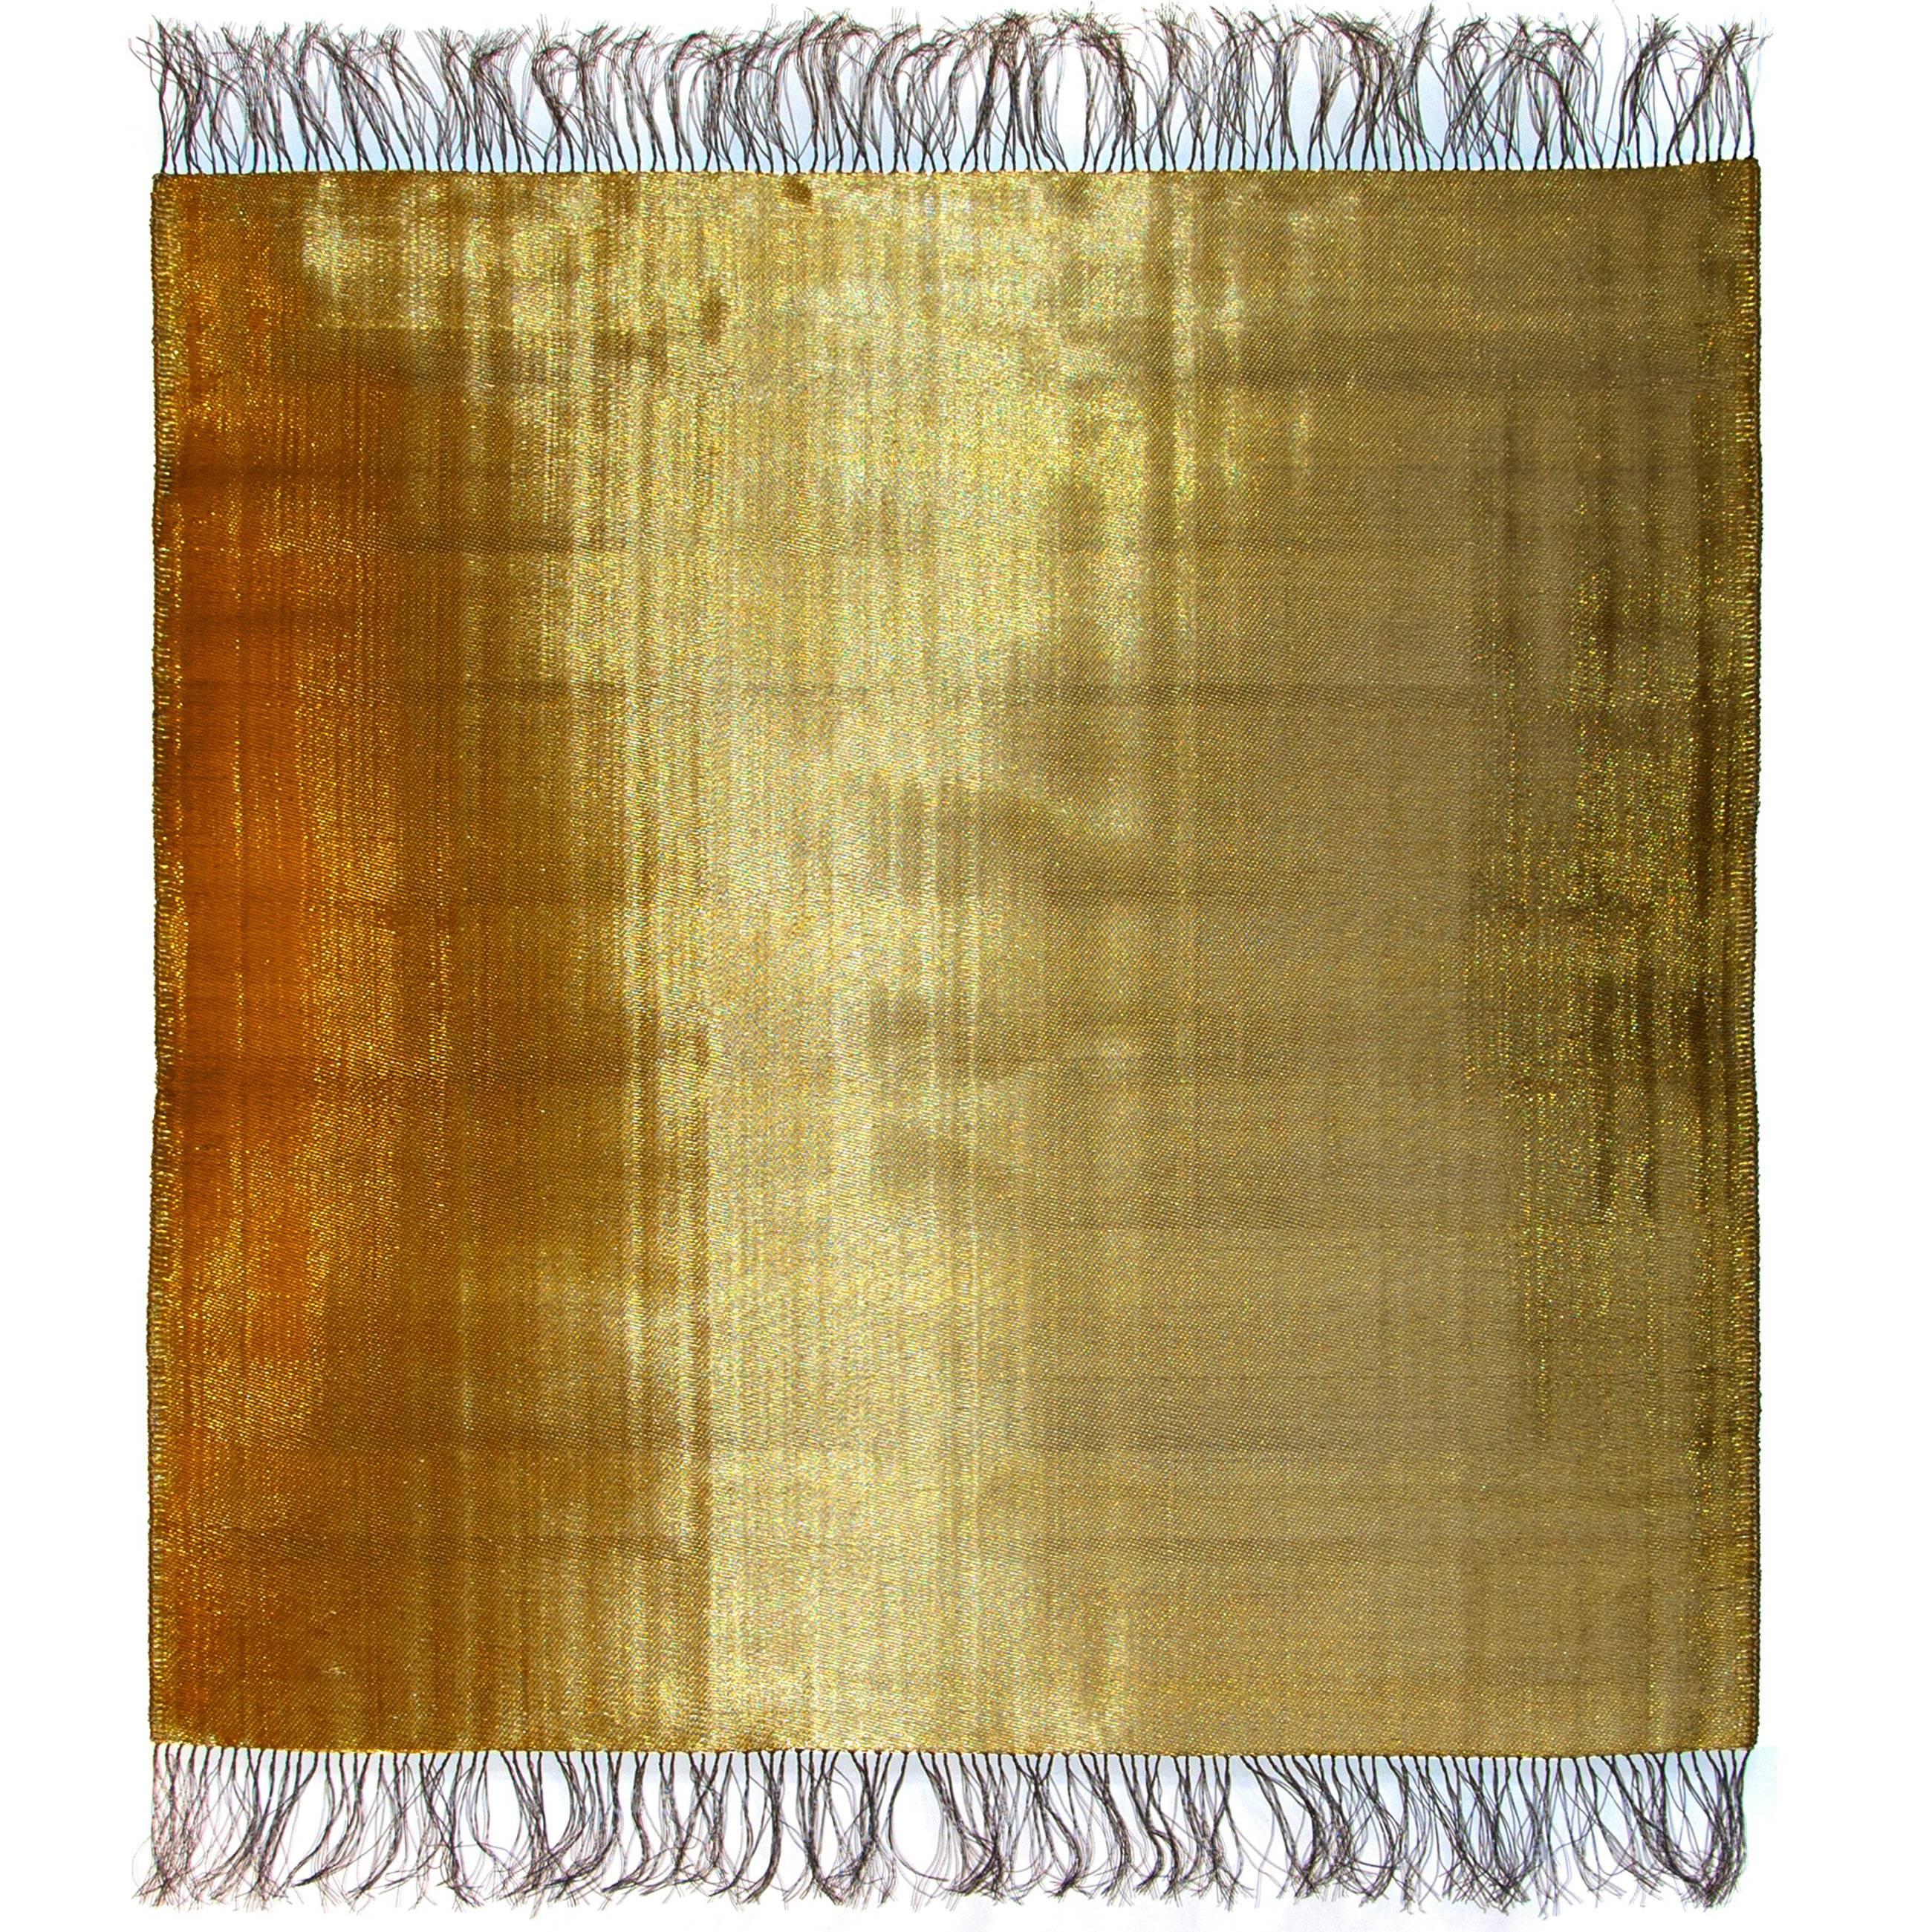 Spectrum 10 hand-woven in brass and steel by Dougall Paulson For Sale